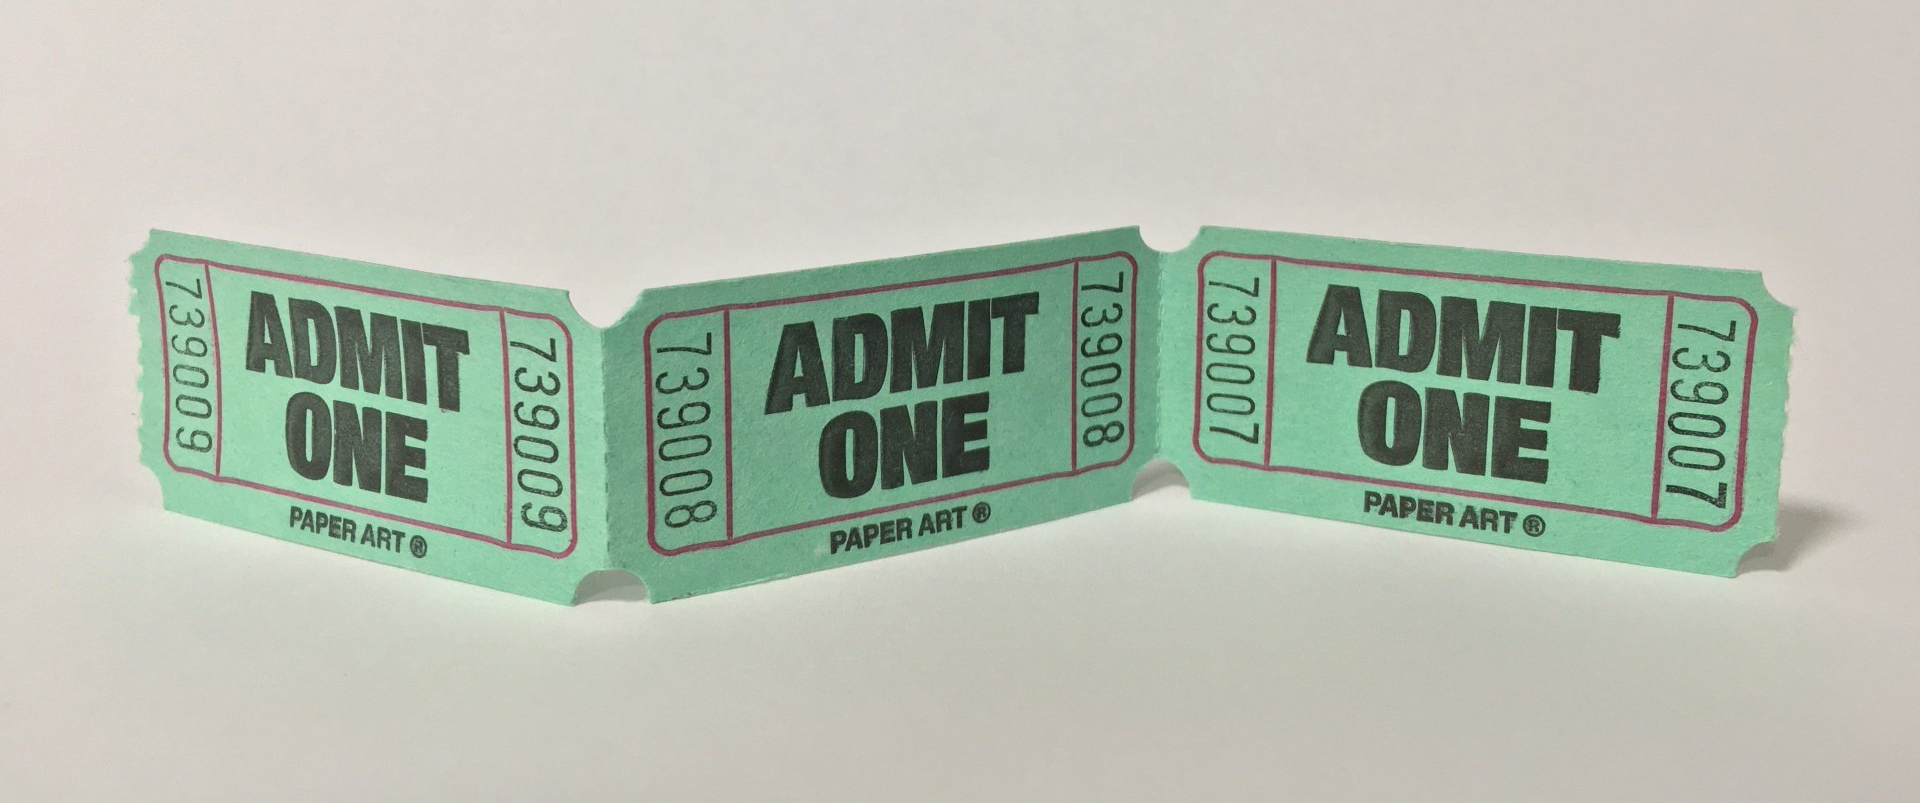 A photograph of 3 cinema paper entrance tickets that say Admit One on each of them